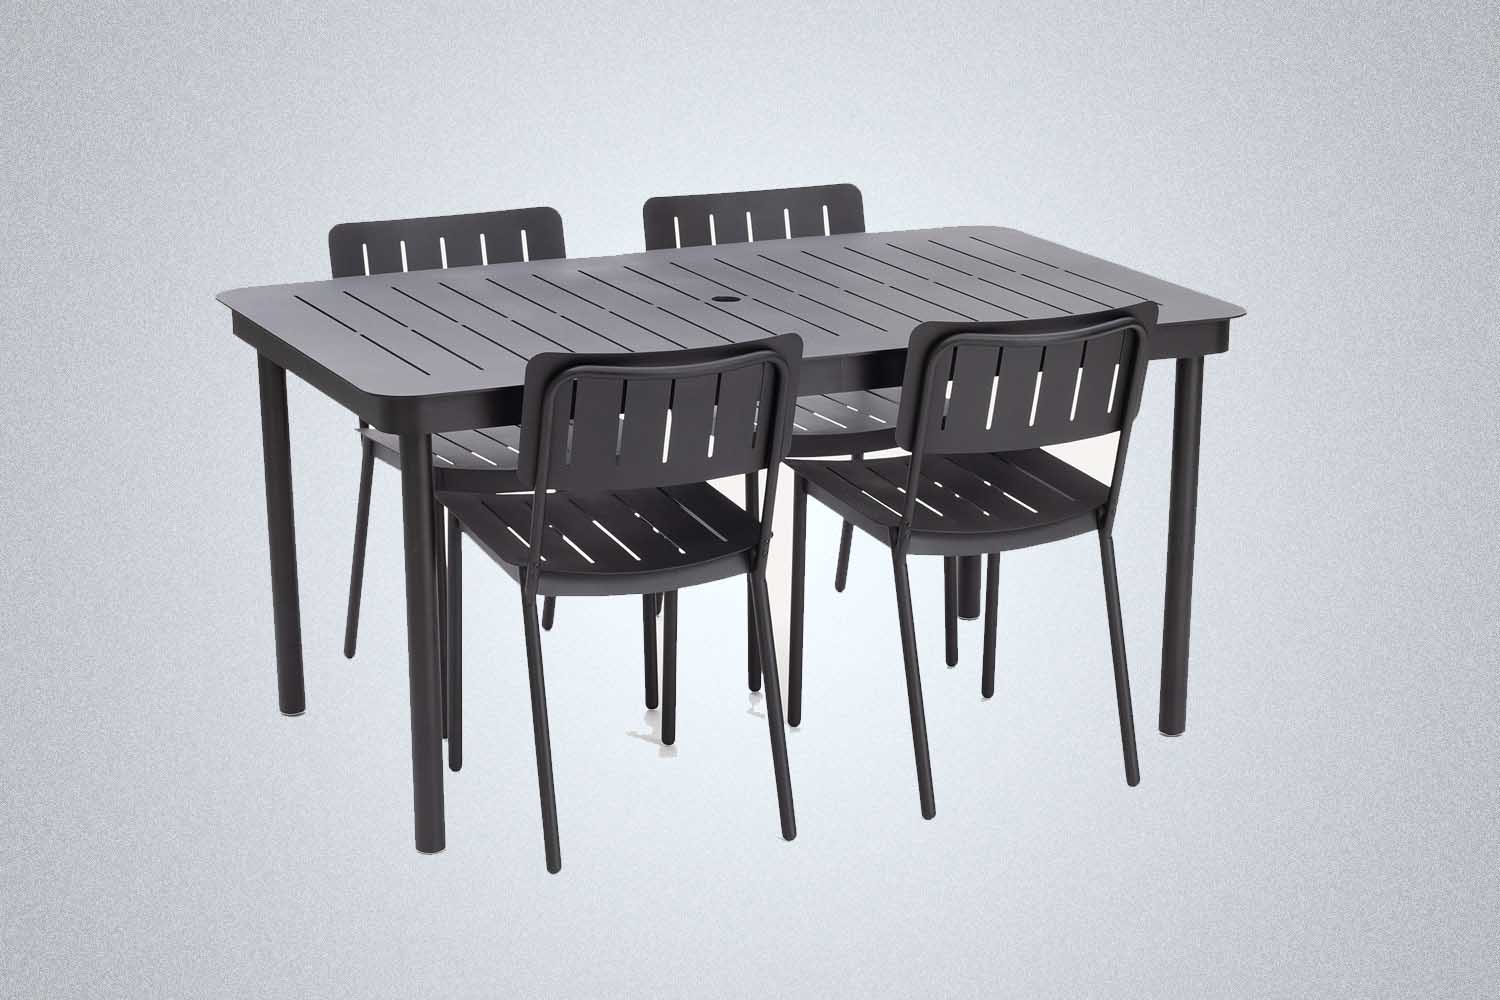 Burrow Relay Outdoor Dining Set, Table & 4 Chairs